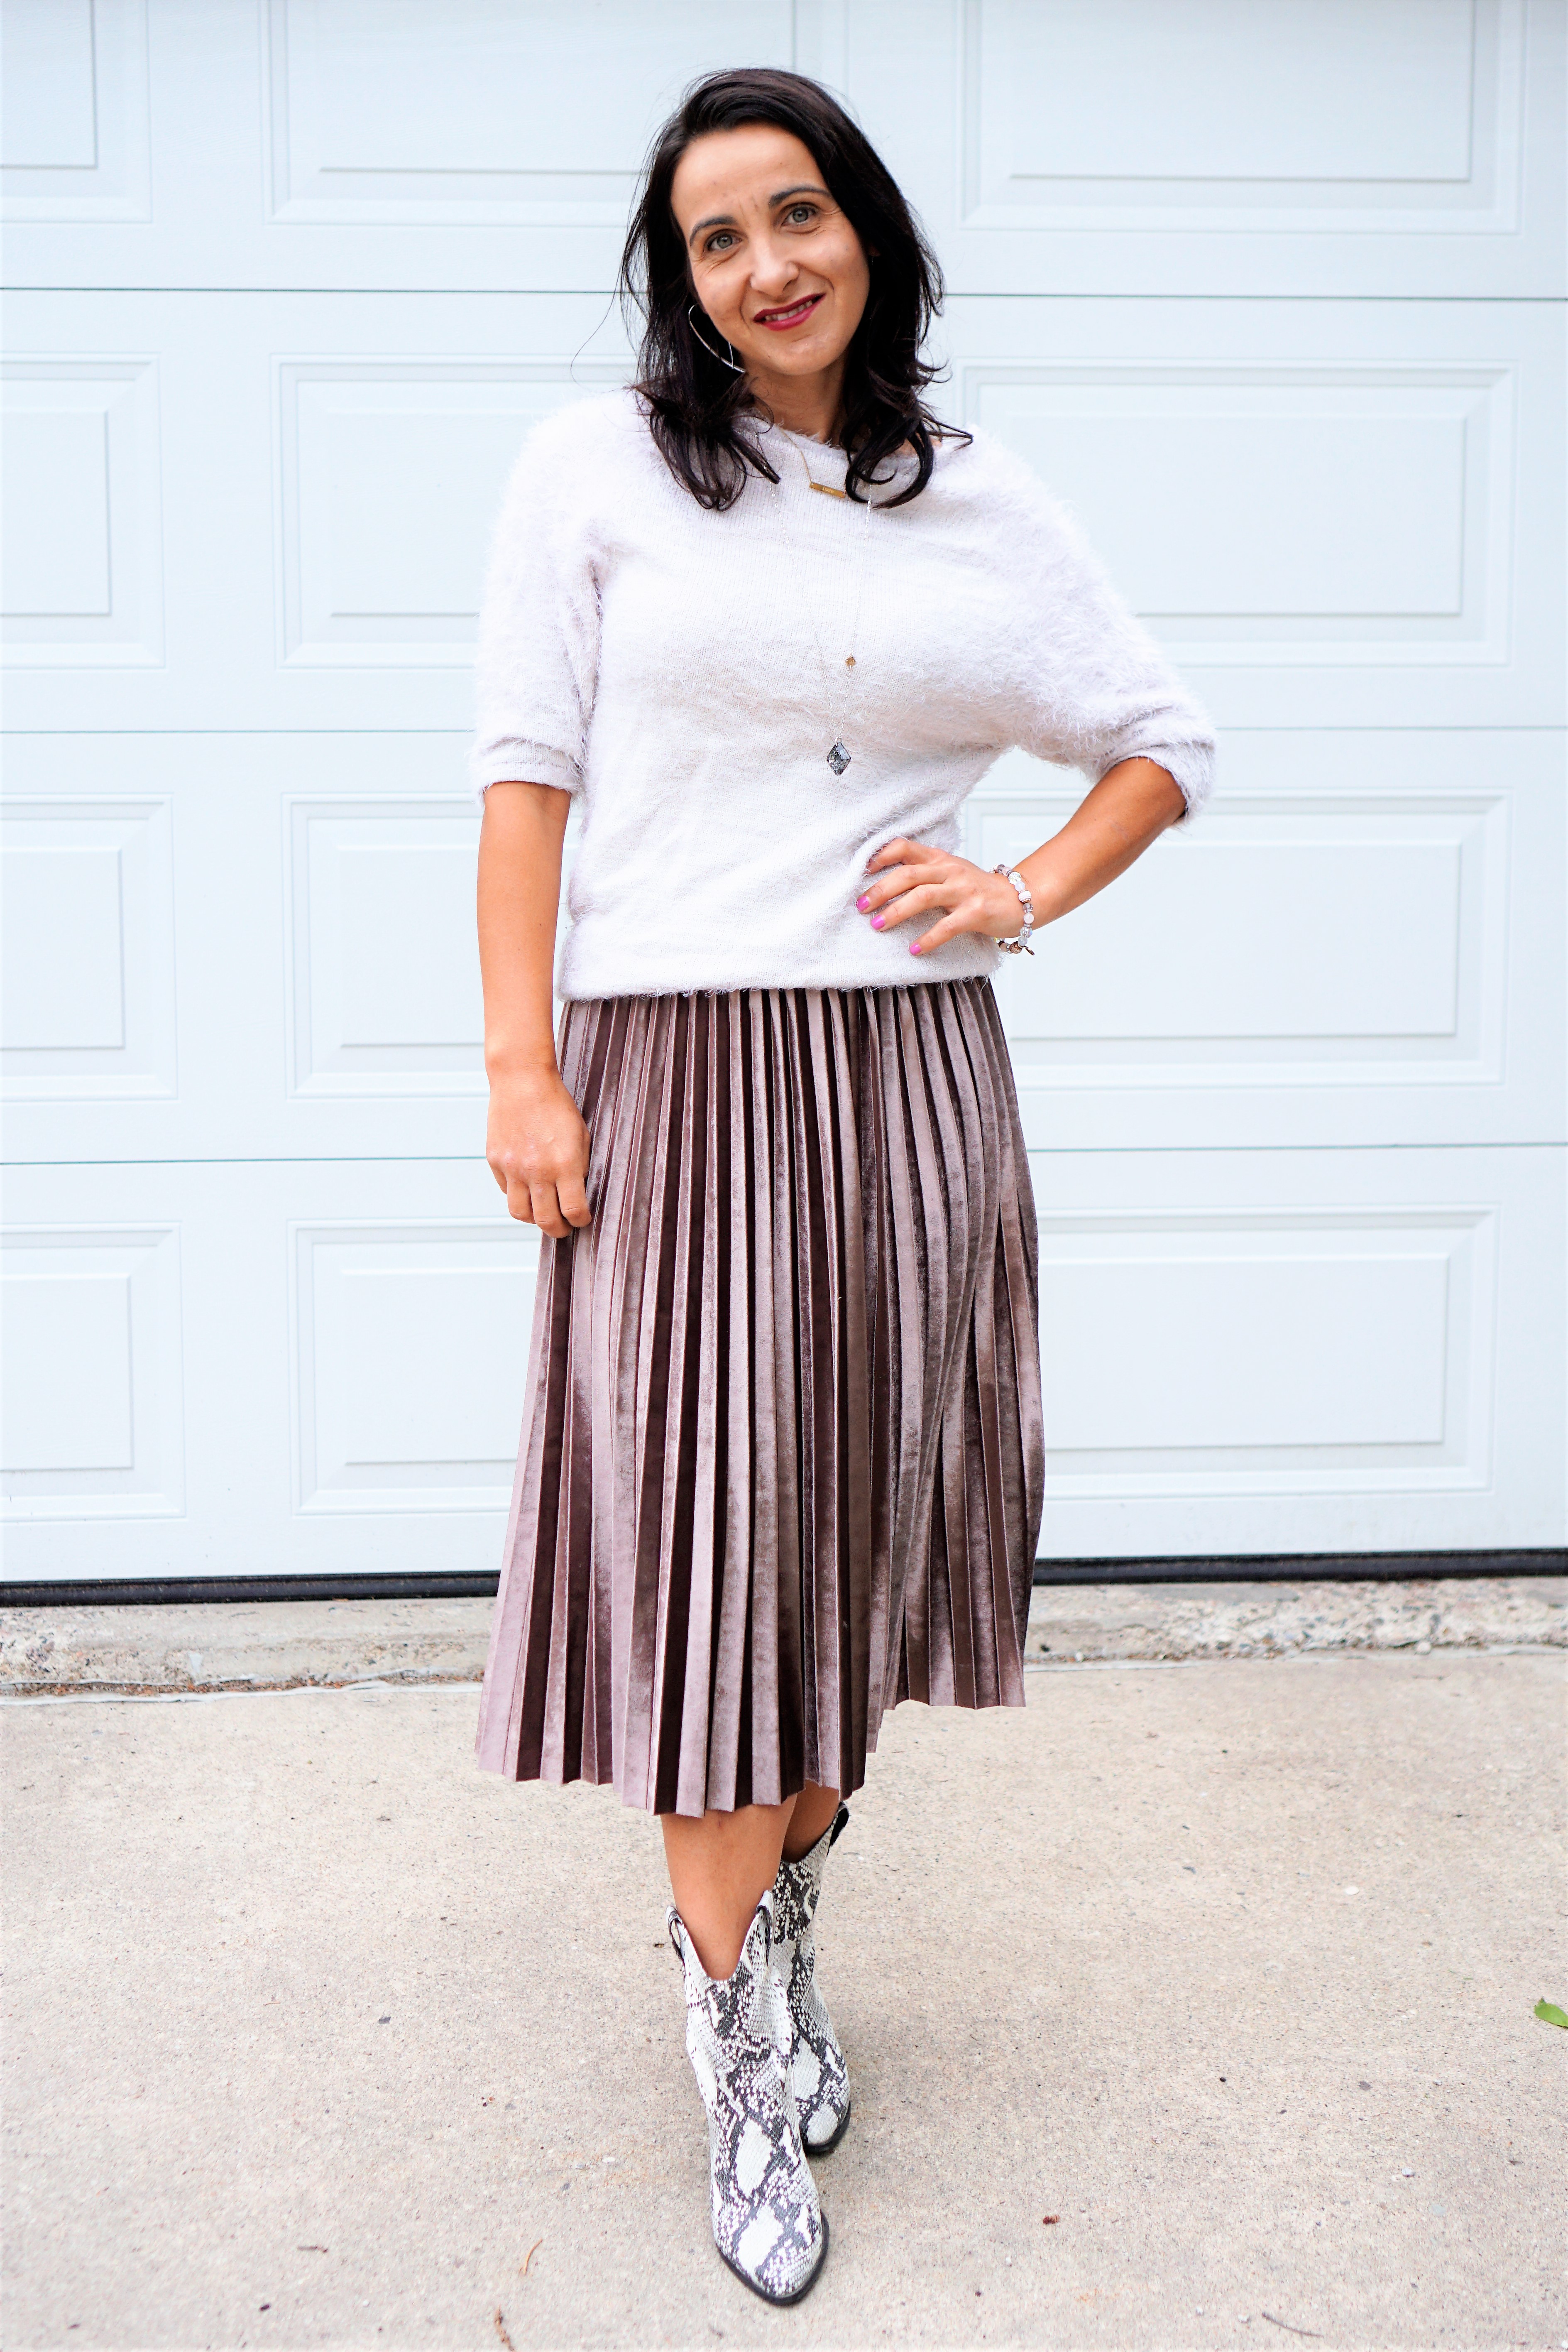 Bo's Bodacious Blog: Pretty Pink Pleated Skirt Five Ways & a Link Up